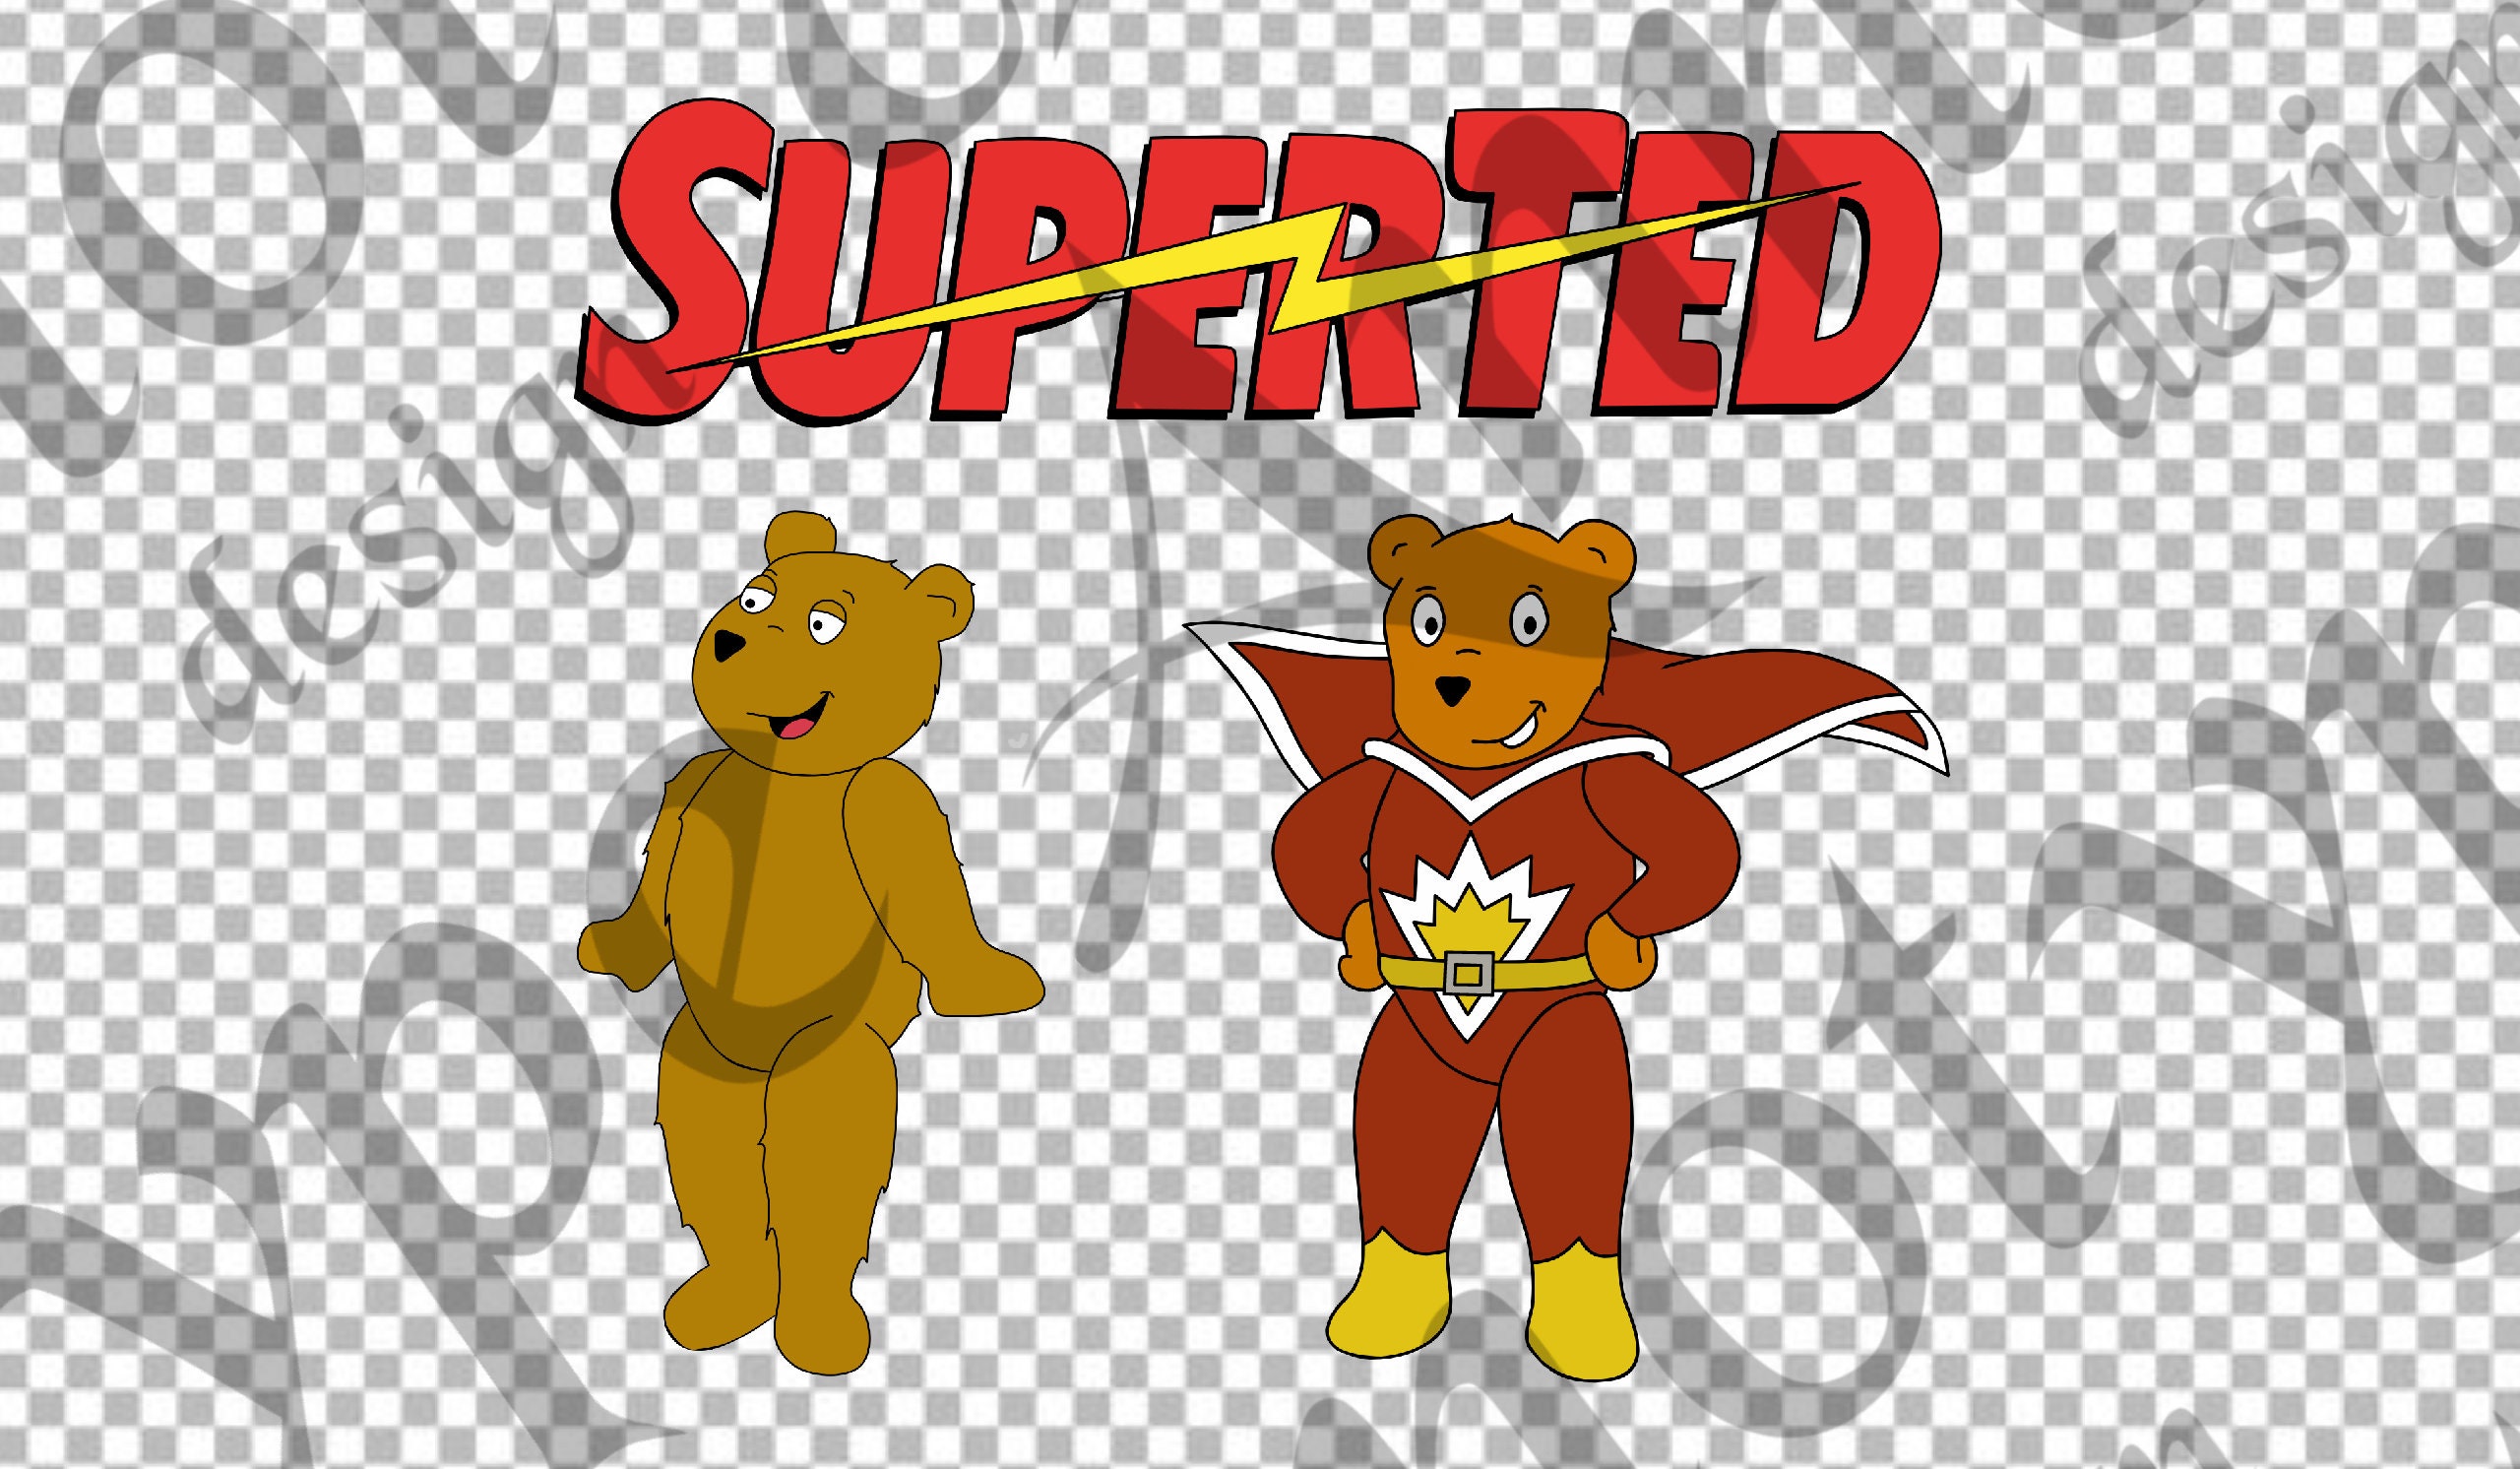 Superted 80s Cartoon SVG Vector Image Pack - Etsy